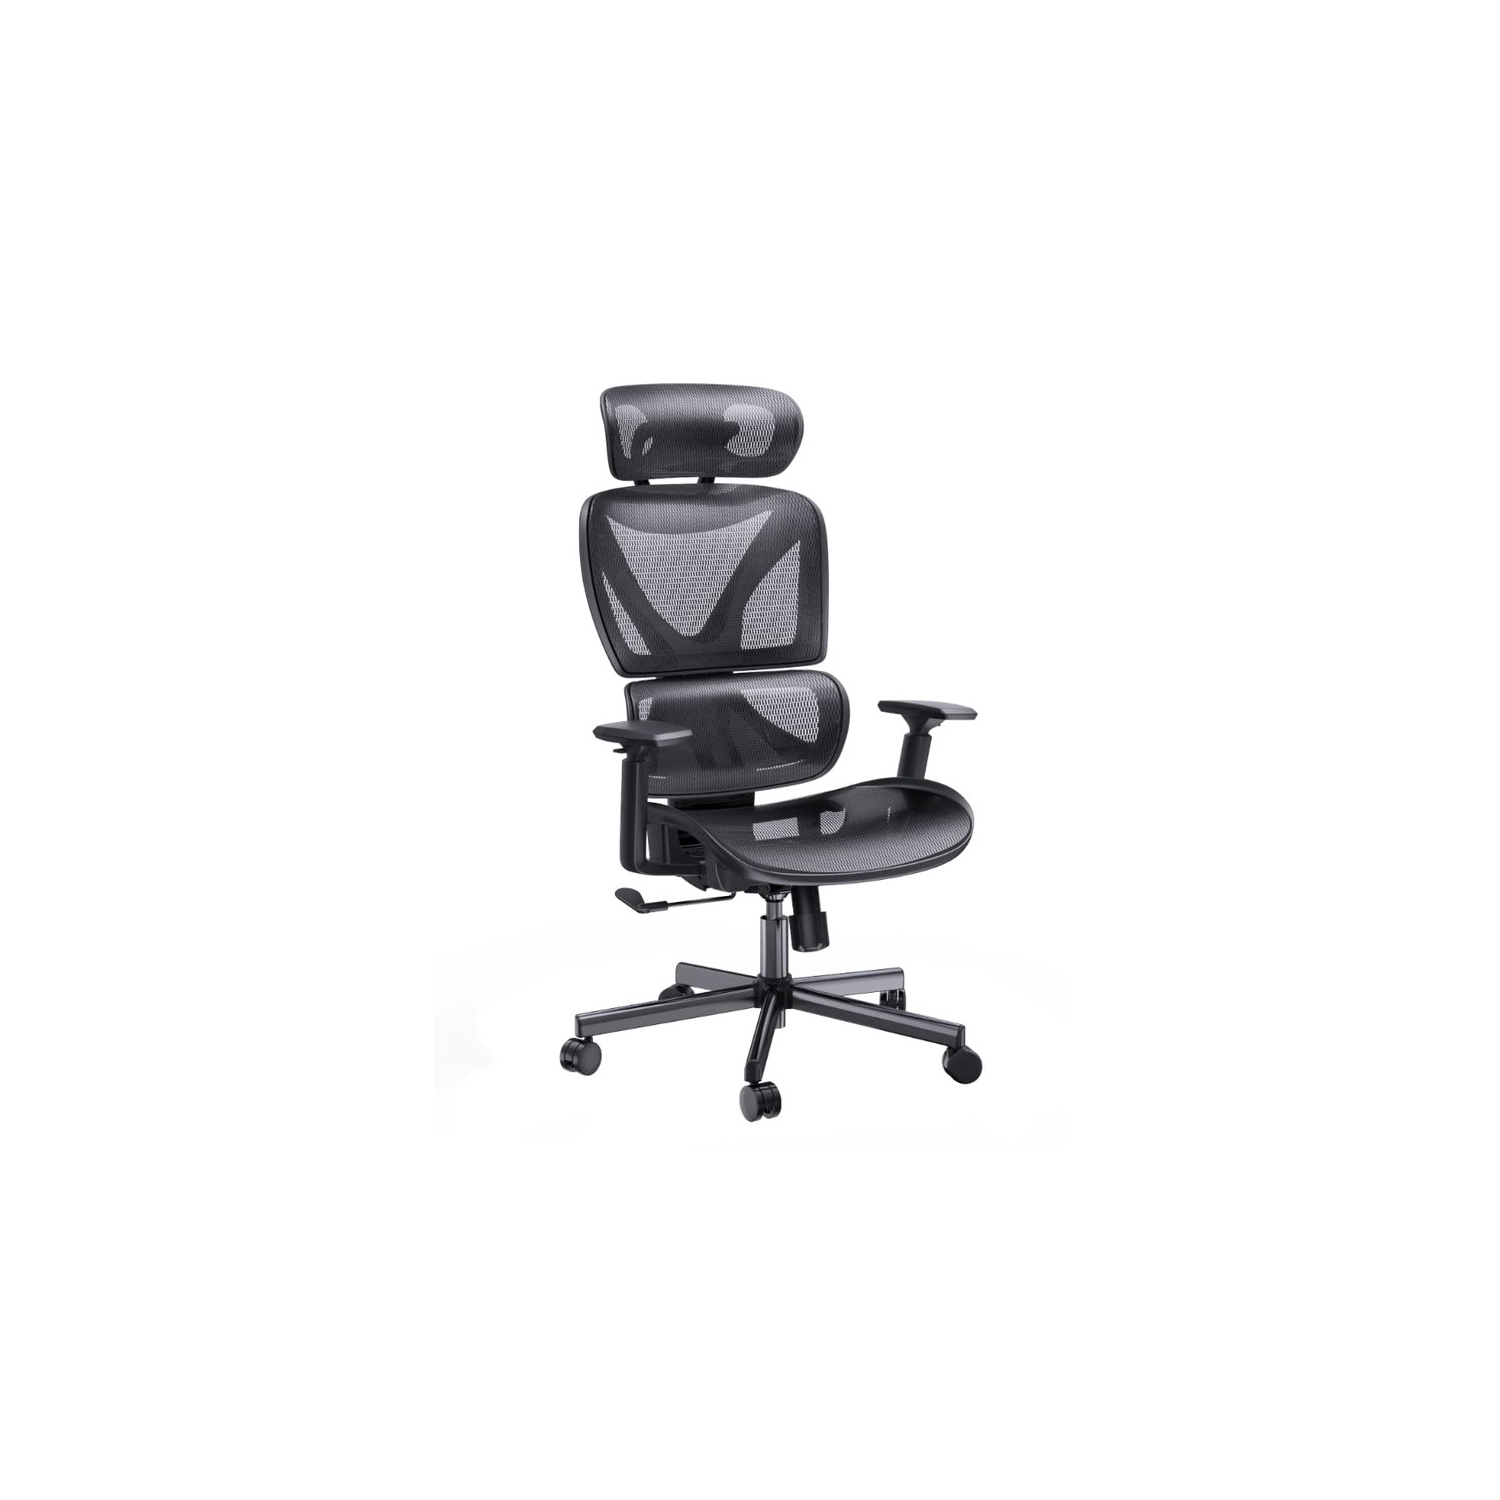 Huanuo Ergonomic Mesh Office Computer Chair with Adaptive High Back, Adjustable 3D Armrest, Partitioned Lumbar Support & Adjustable Headrest - Black